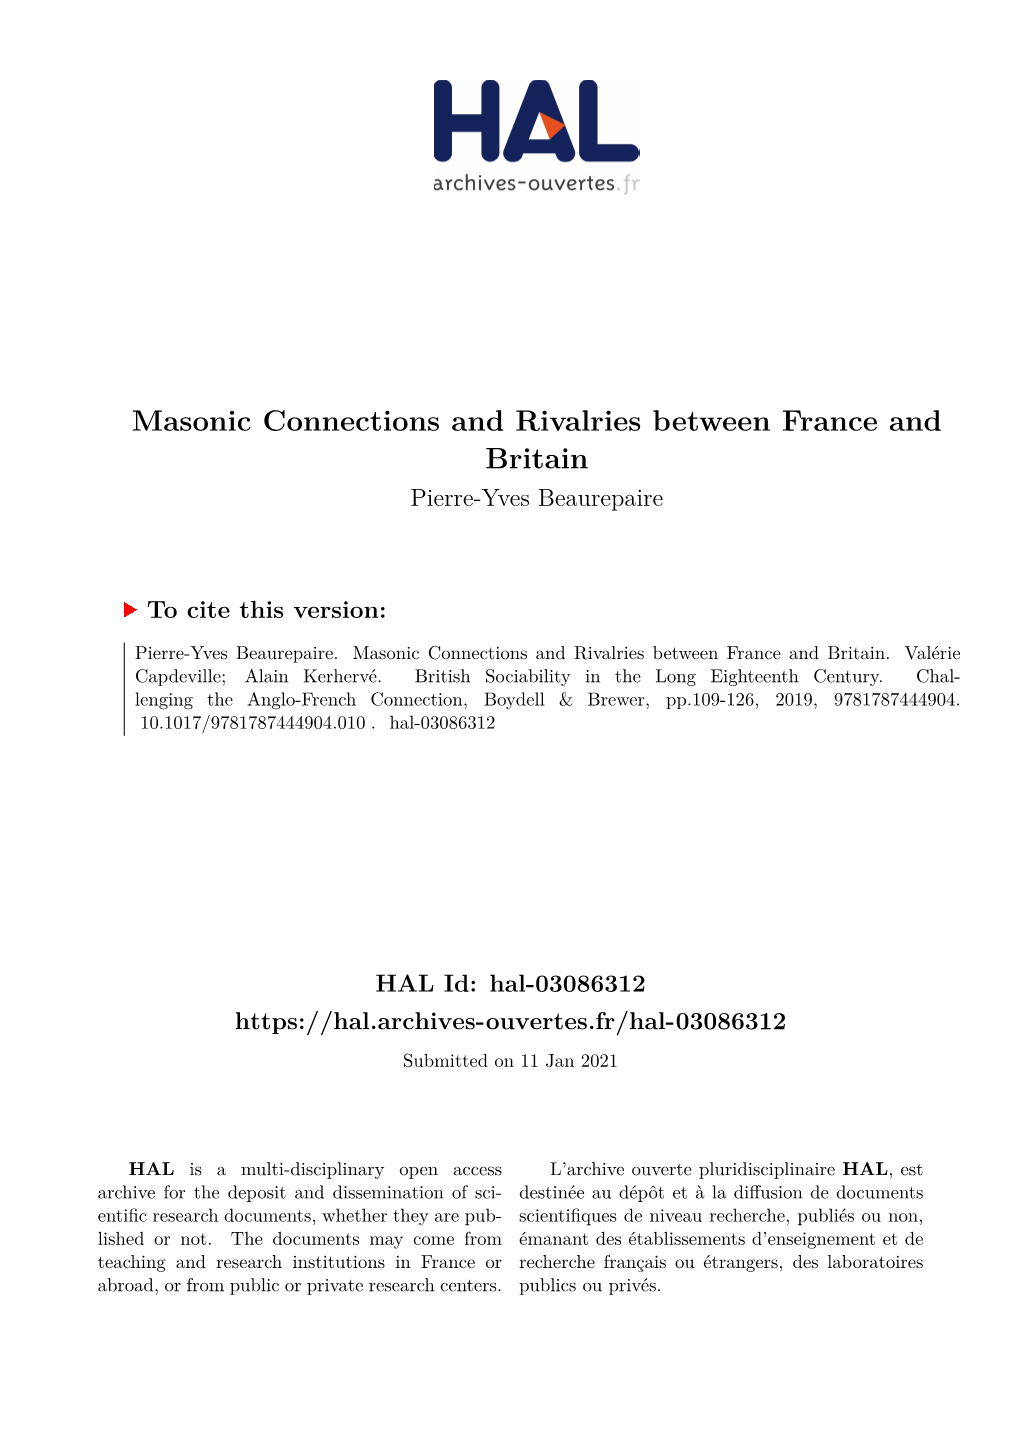 Masonic Connections and Rivalries Between France and Britain Pierre-Yves Beaurepaire